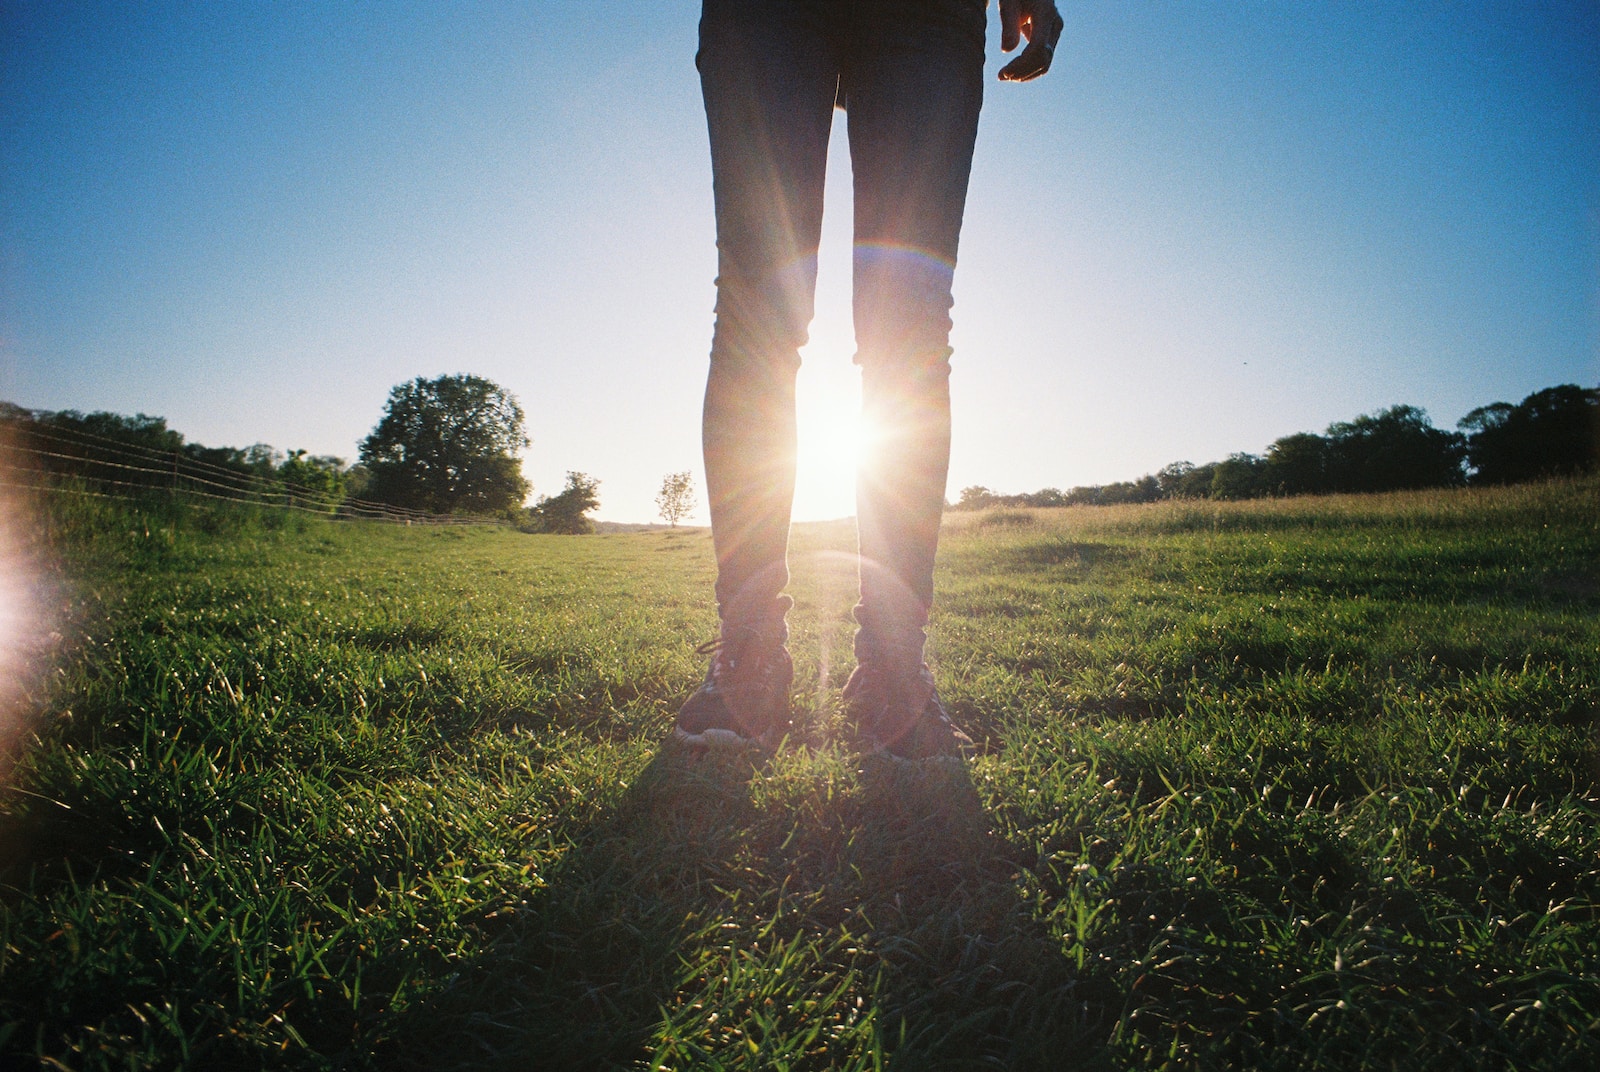 person in black pants standing on green grass field during daytime